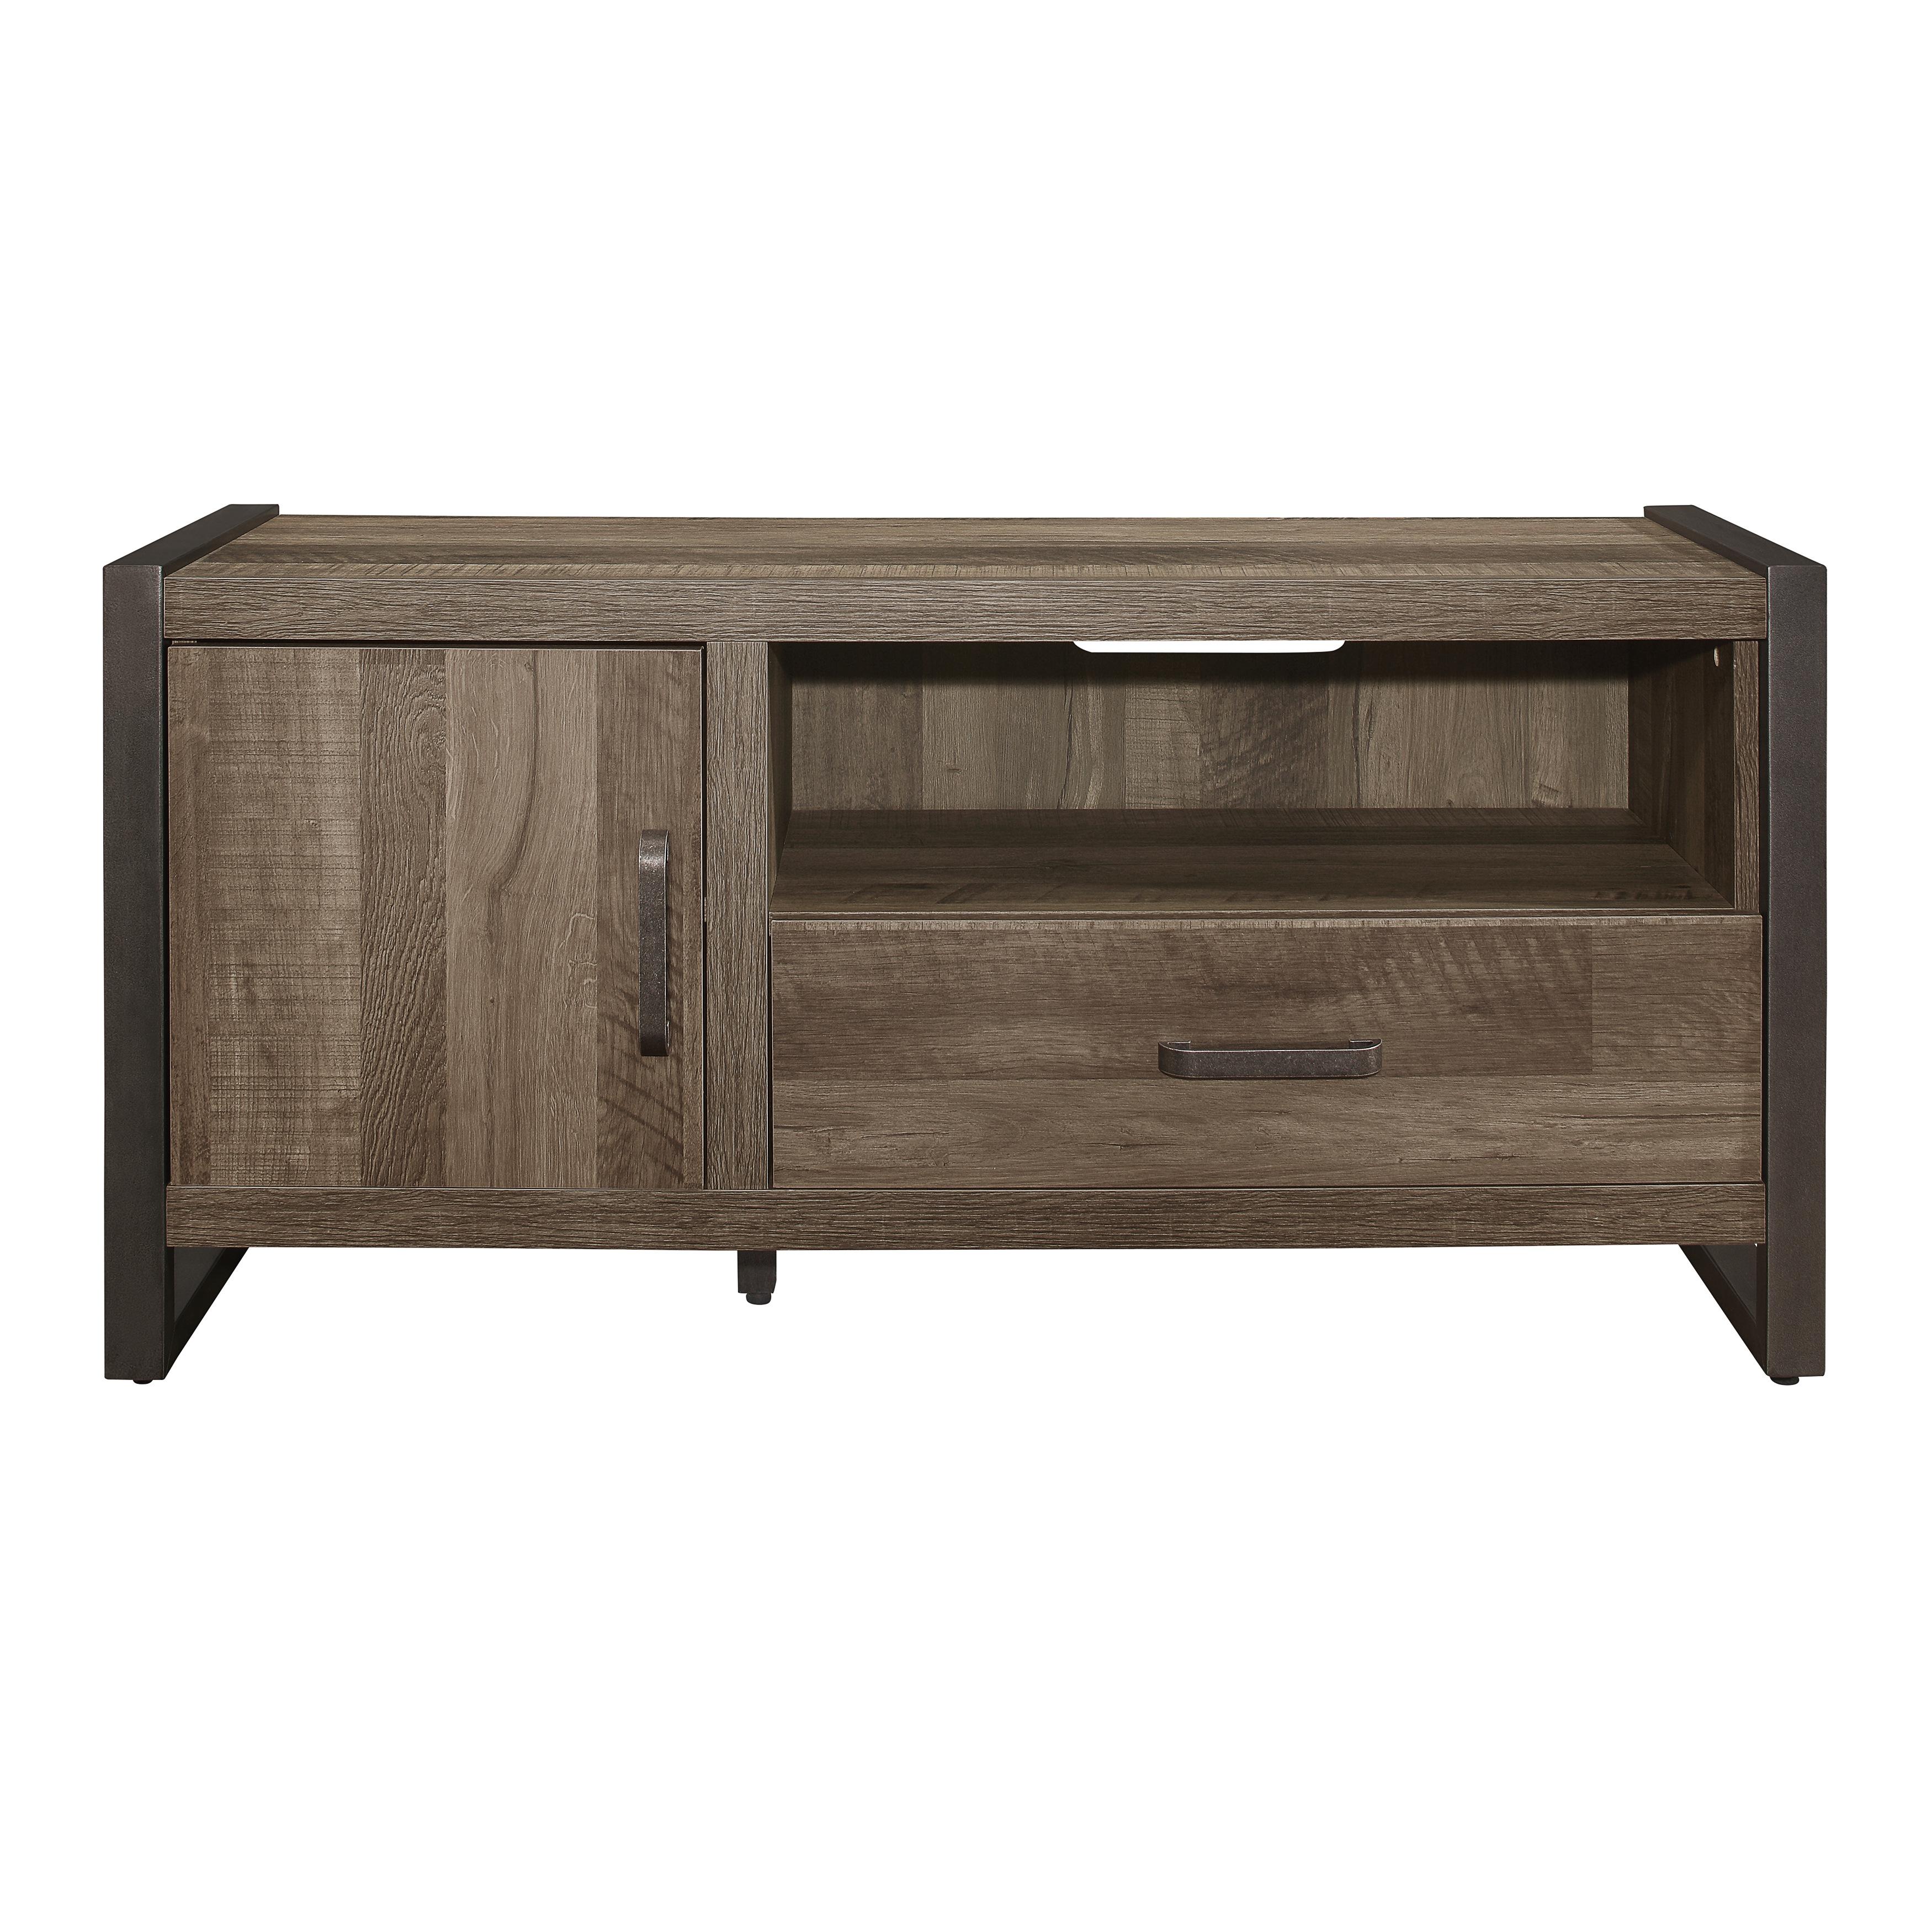 Modern TV Stand 36060NM-51T Dogue 36060NM-51T in Gunmetal, Brown 